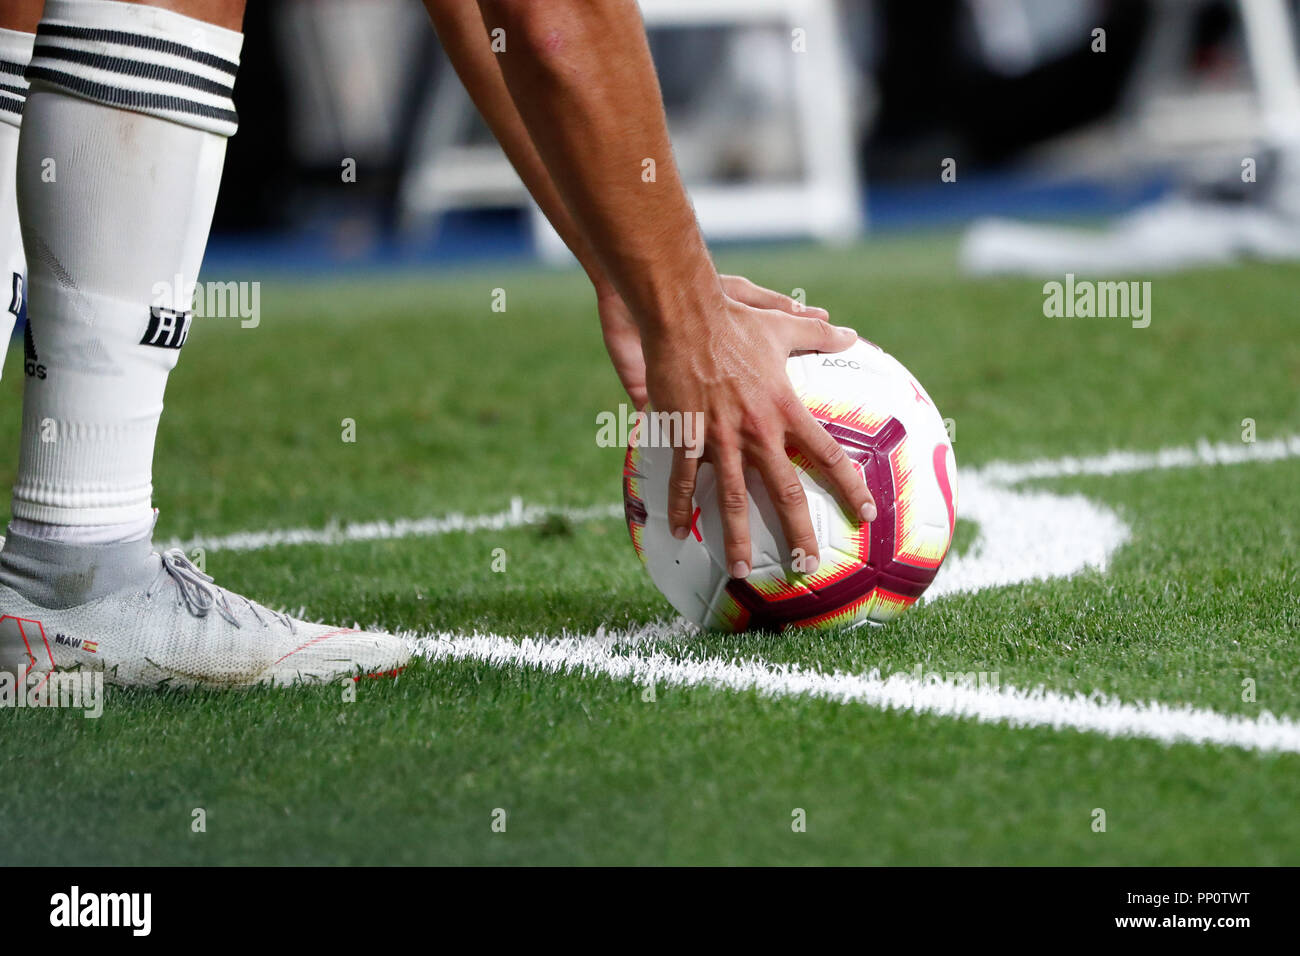 September 22, 2018 - Marco Asensio of Real Madrid with the Nike ball of the  match during the La Liga (Spanish Championship) football match between Real  Madrid and RCD Espanyol on September